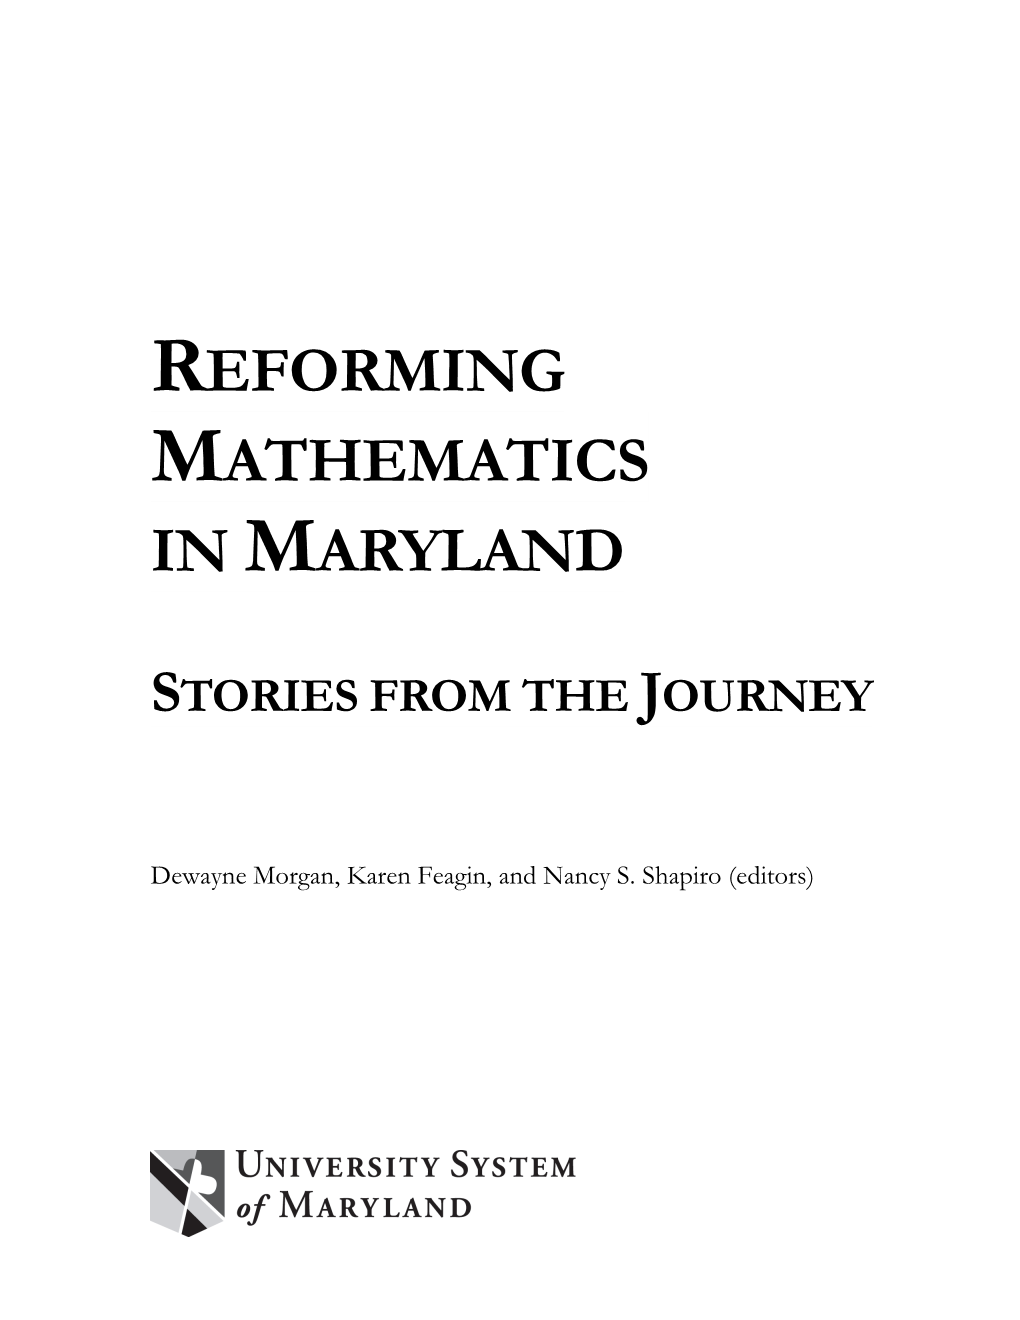 Reforming Mathematics in Maryland: Stories from the Journey COPYRIGHT and ACKNOWLEDGMENTS Copyright 2019, the University System of Maryland